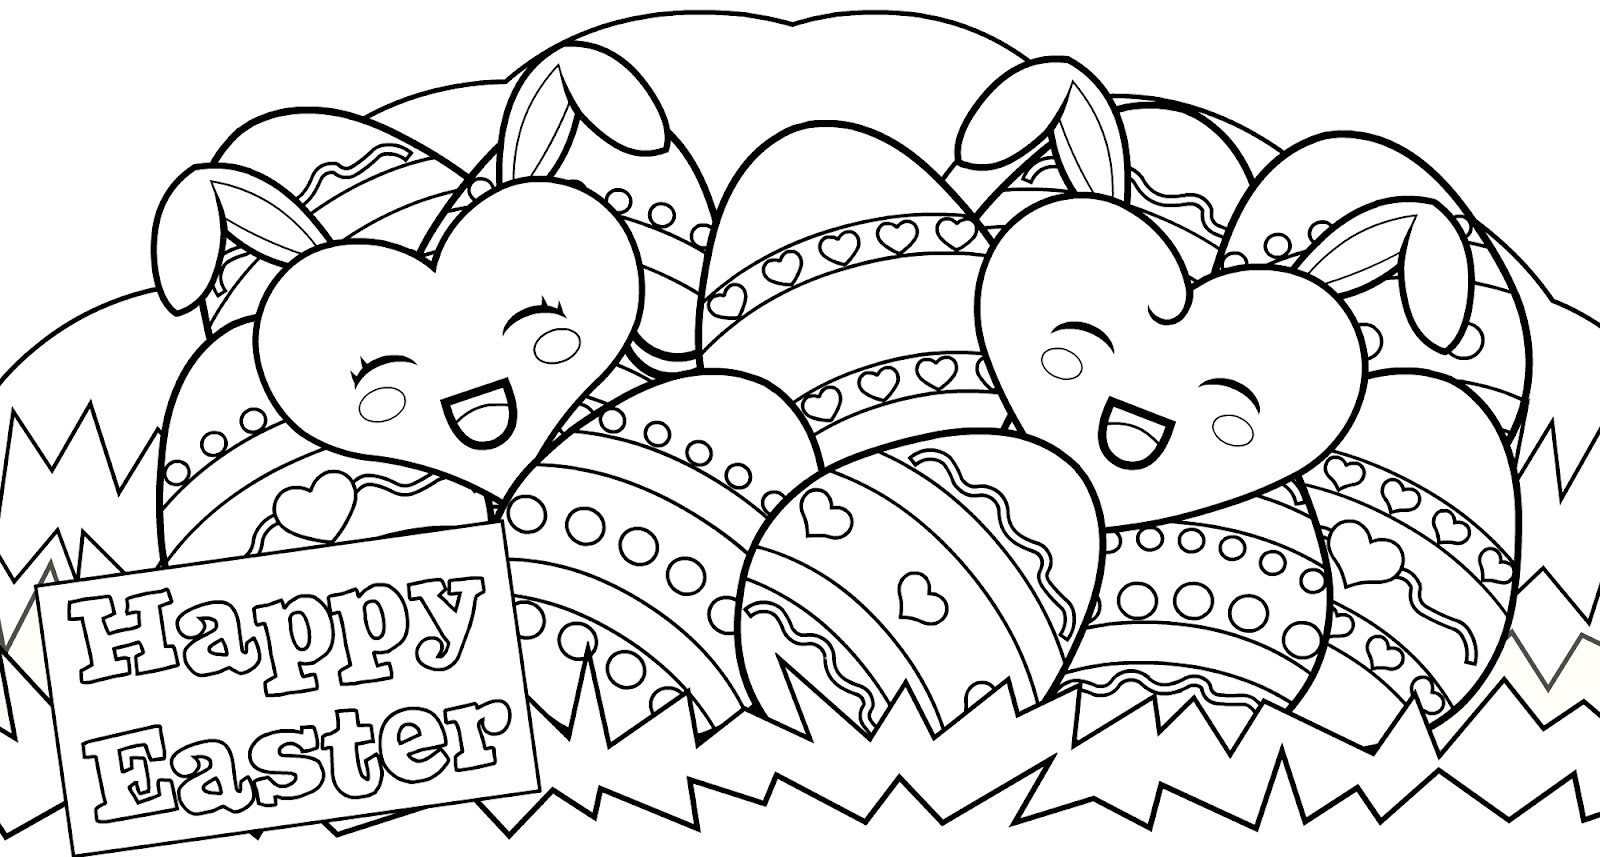 Download Free Easter Coloring Sheets | Holiday Coloring Pages